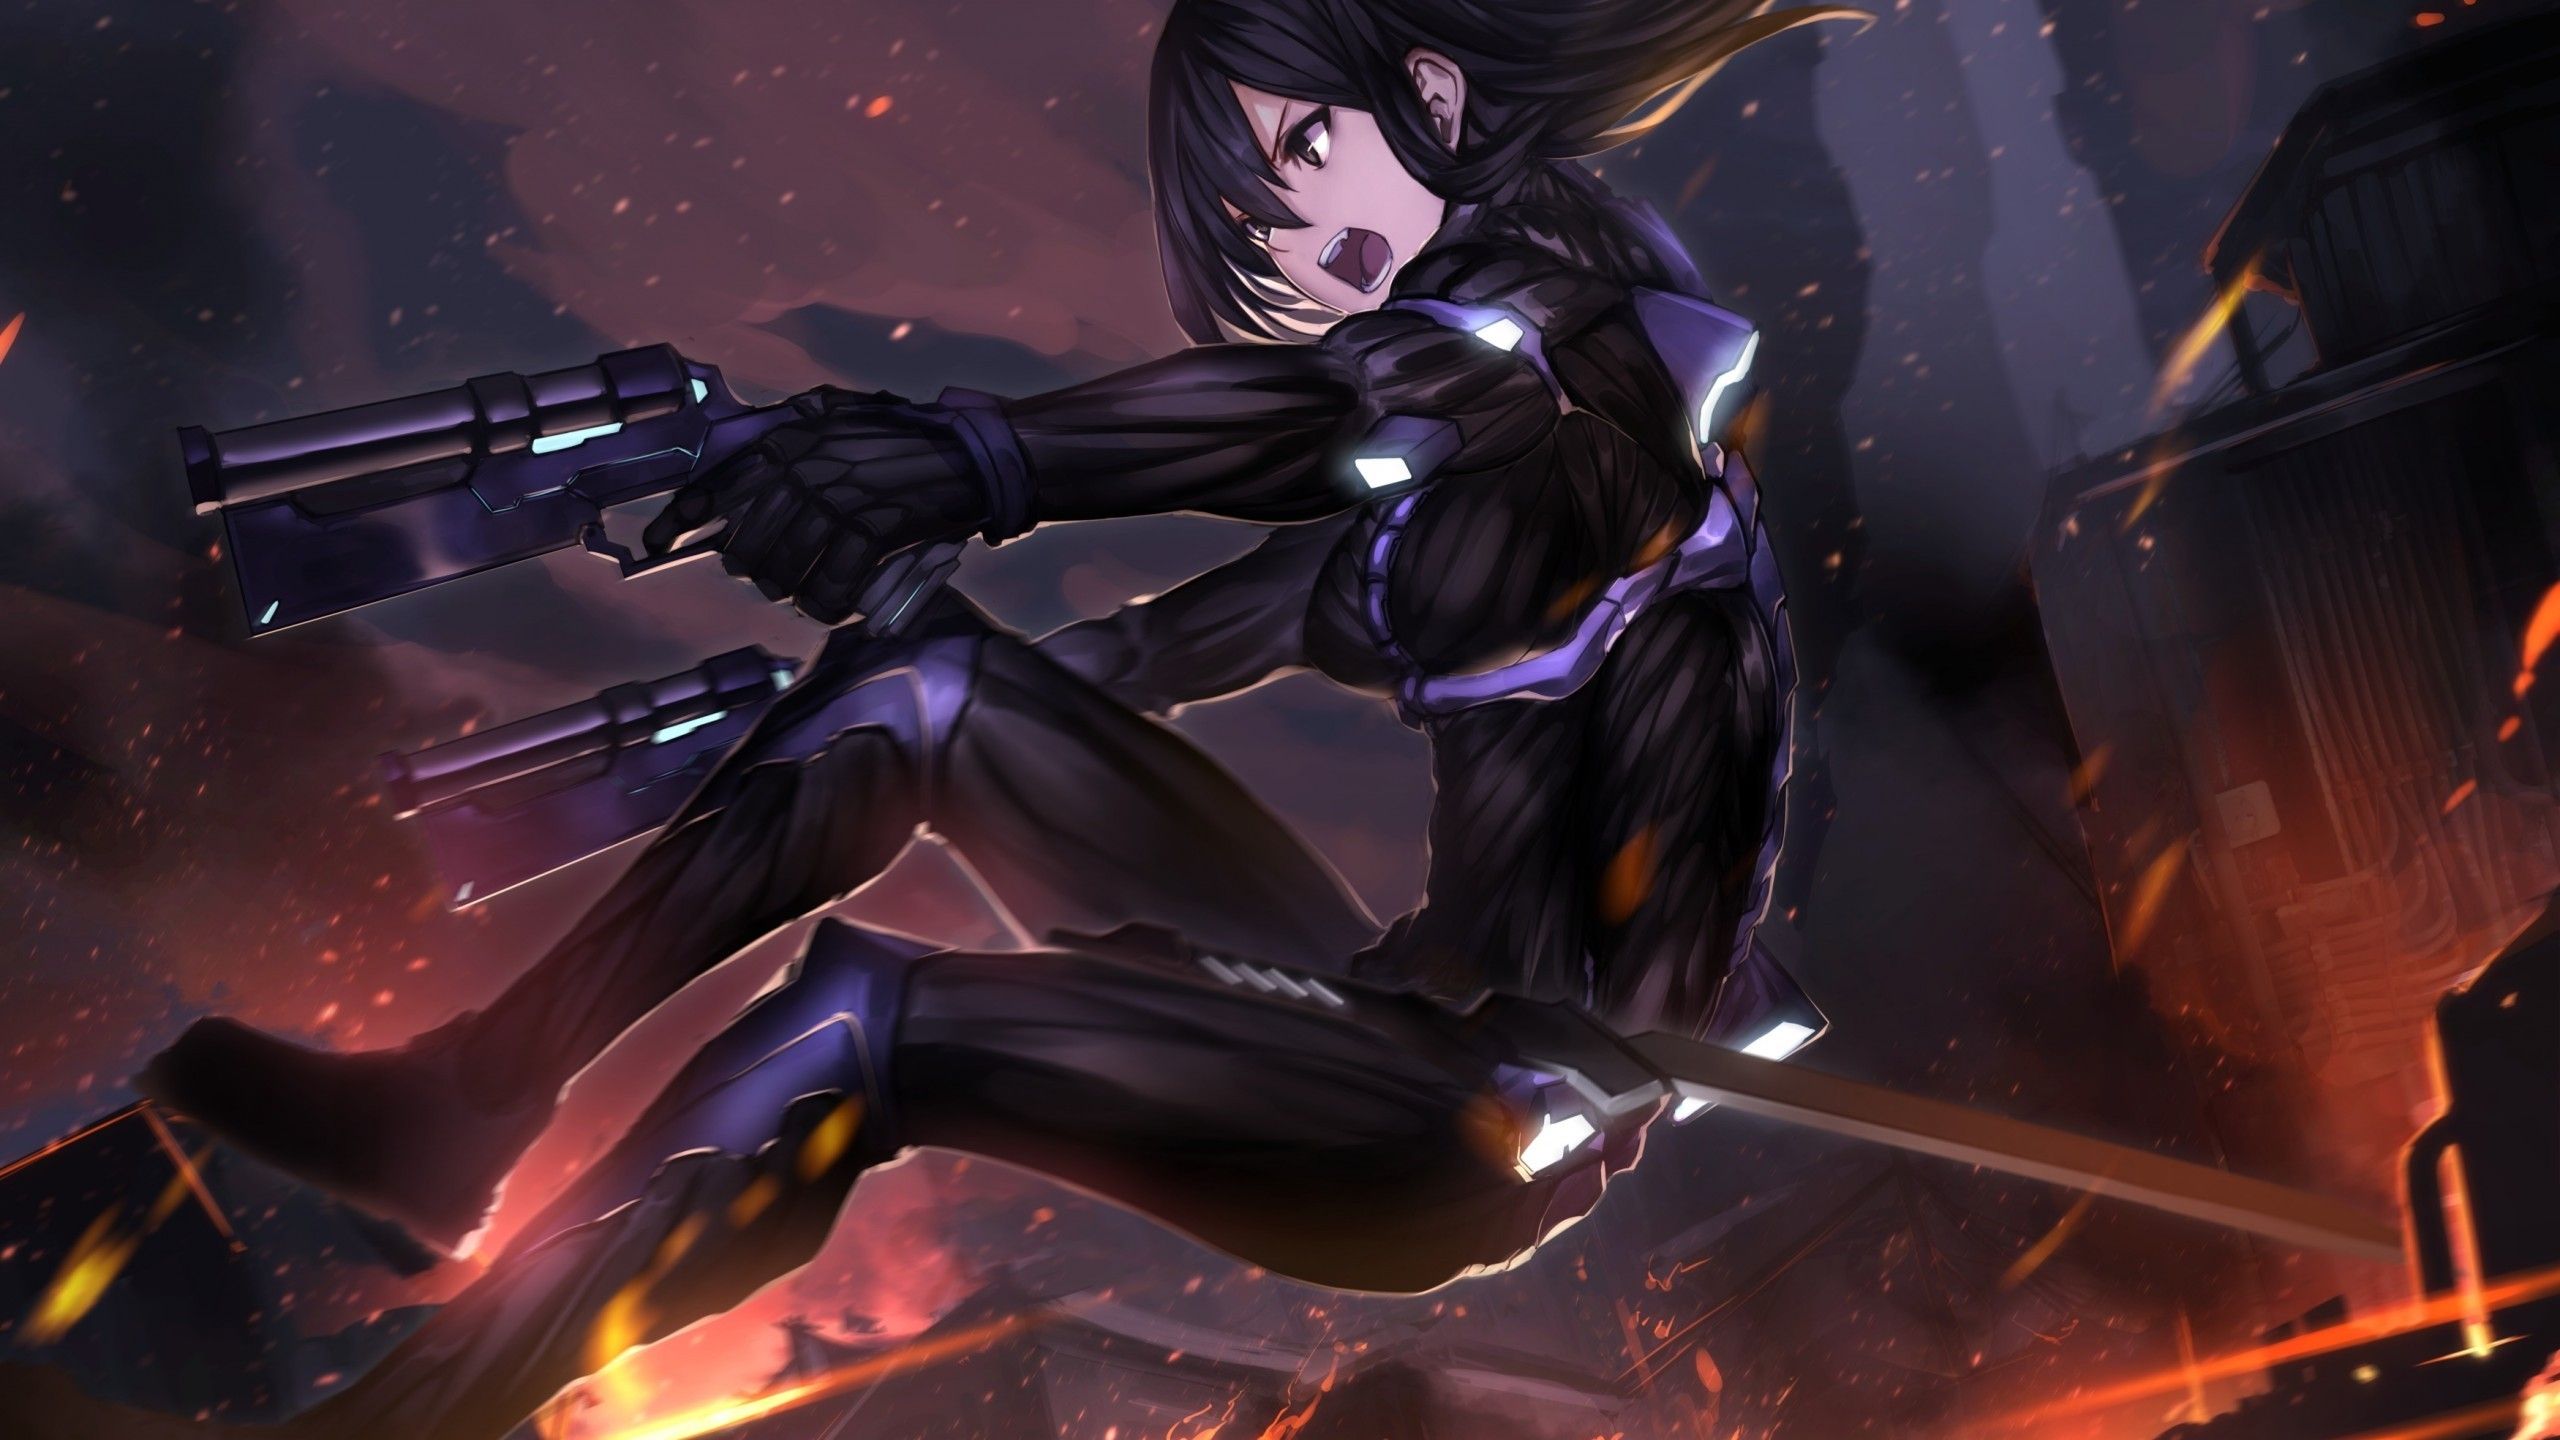 Download 2560x1440 Anime Girl, Jumping, Bodysuit, Flames, Fire, Weapon Wallpaper for iMac 27 inch